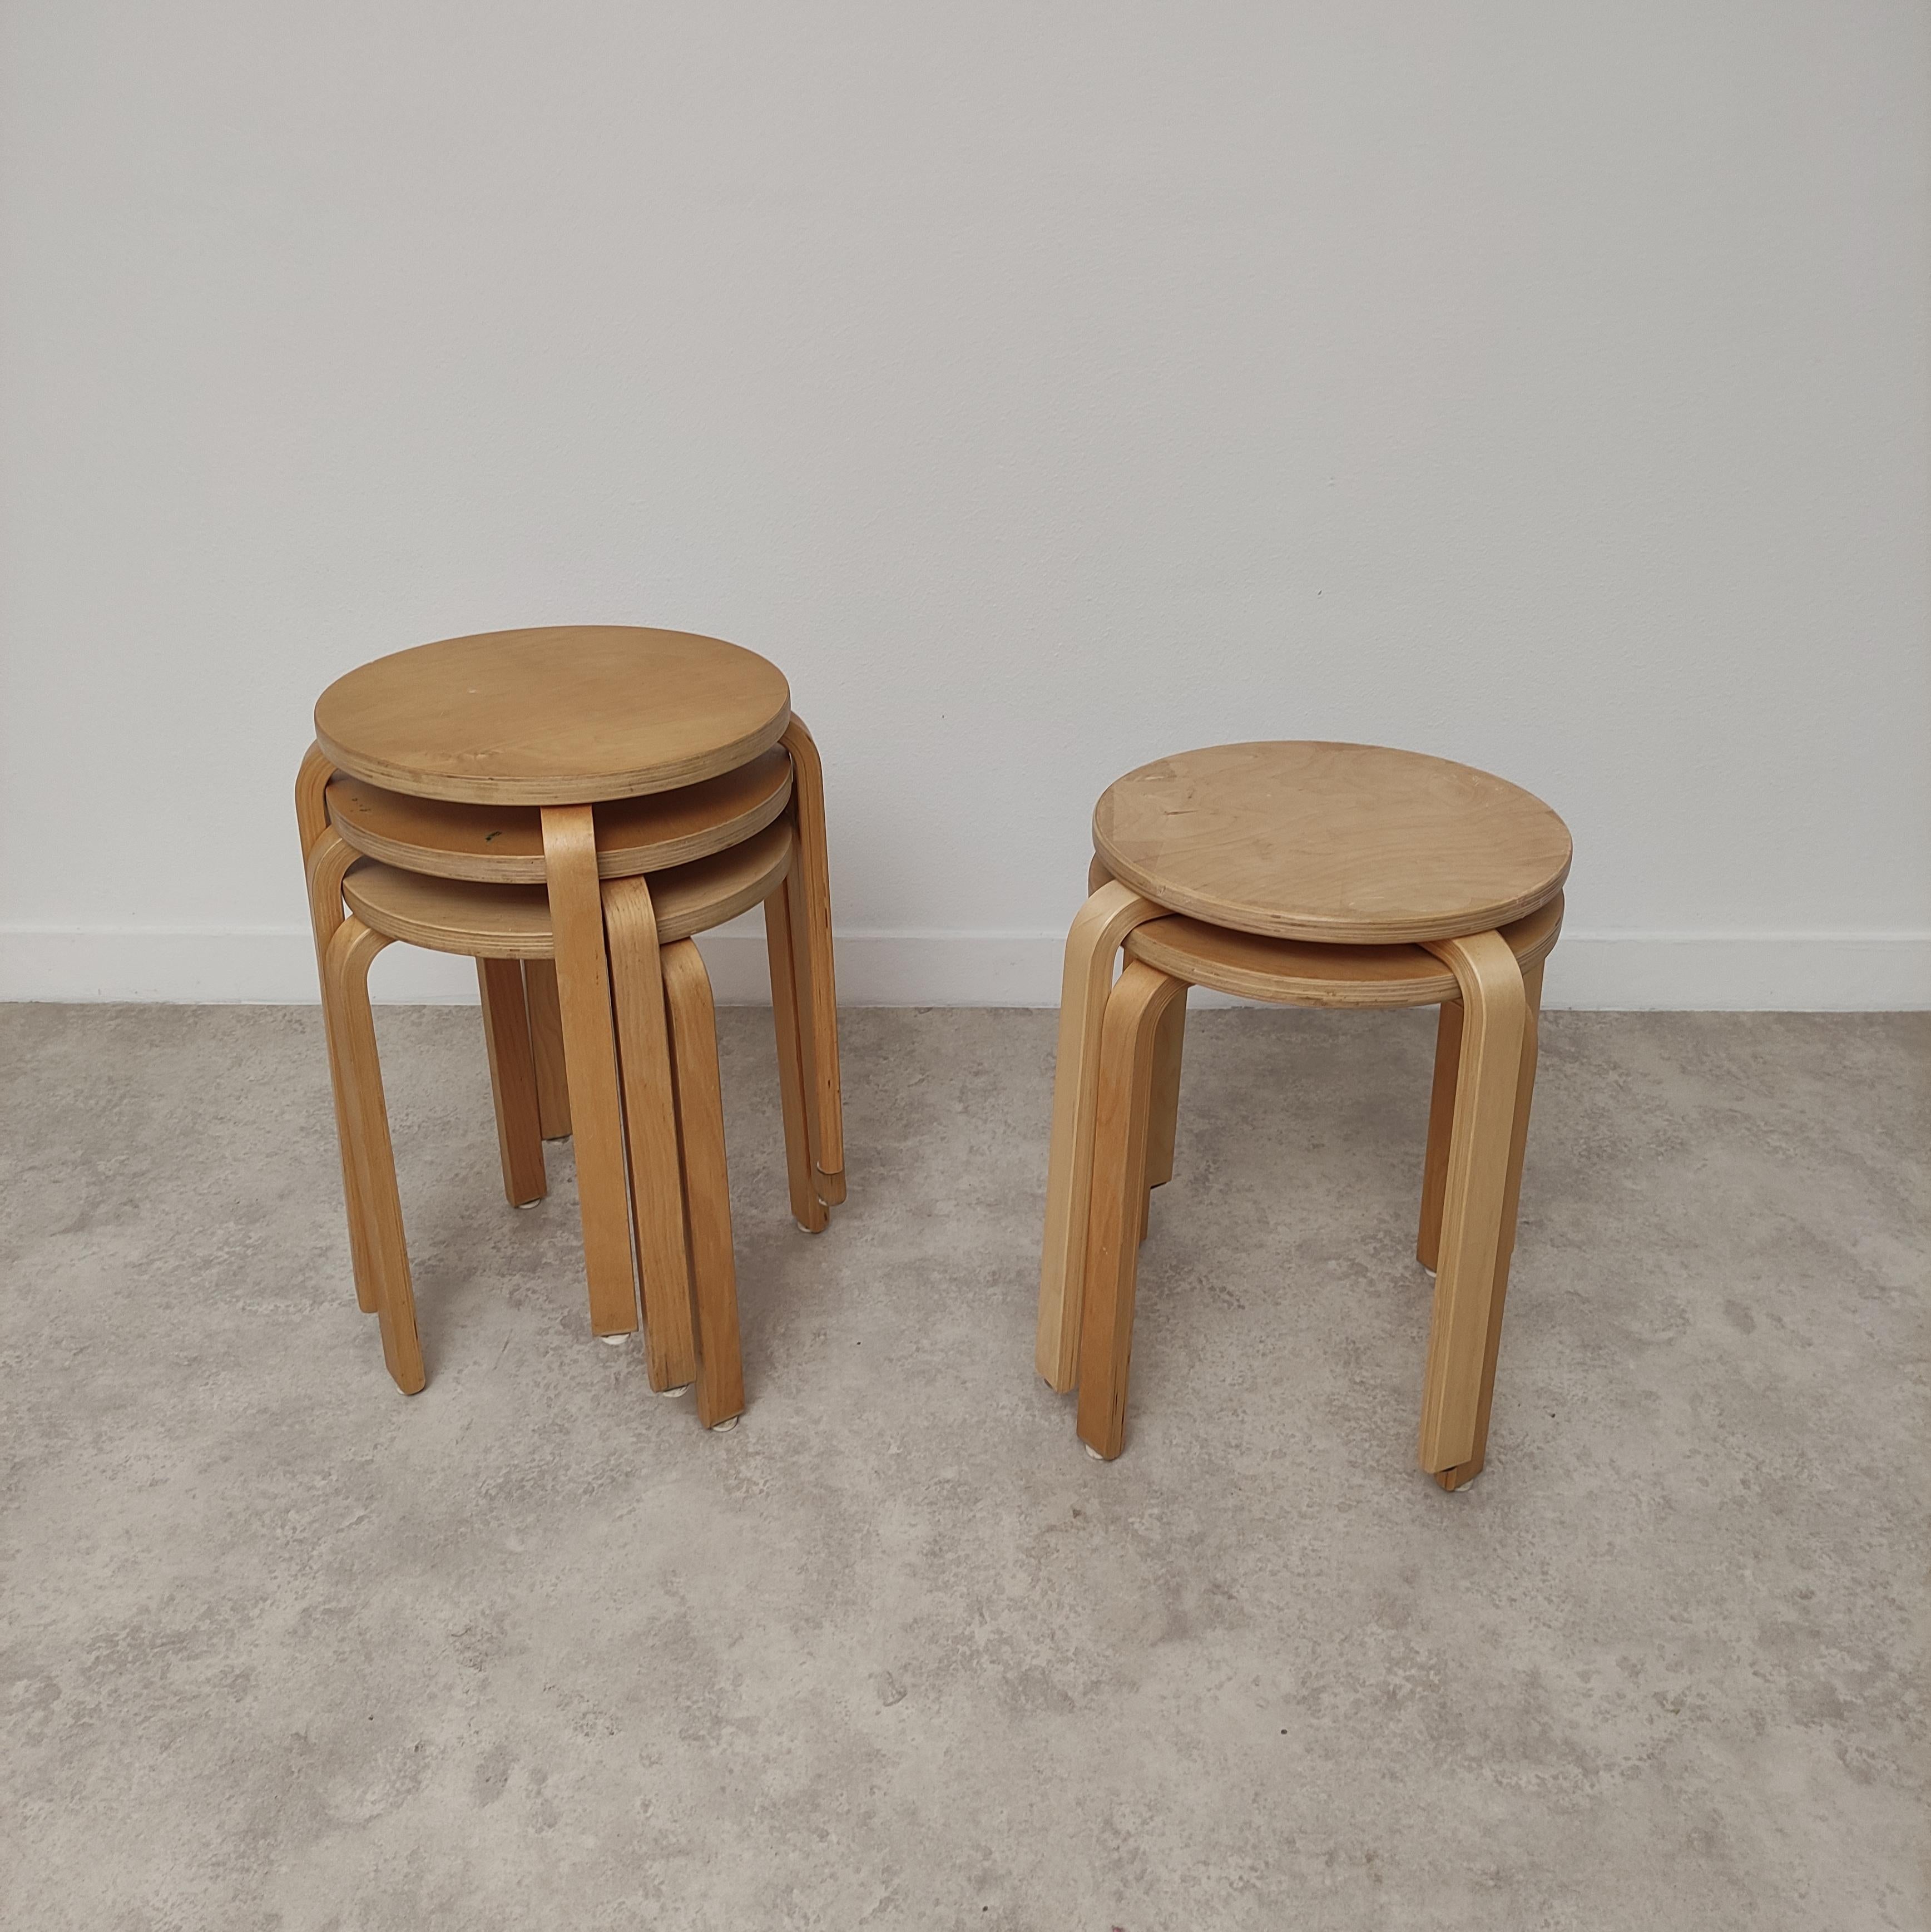 This Is a rare set of 5 Alvar Aalto stools made from Ikea in 1990.
This stool was called 